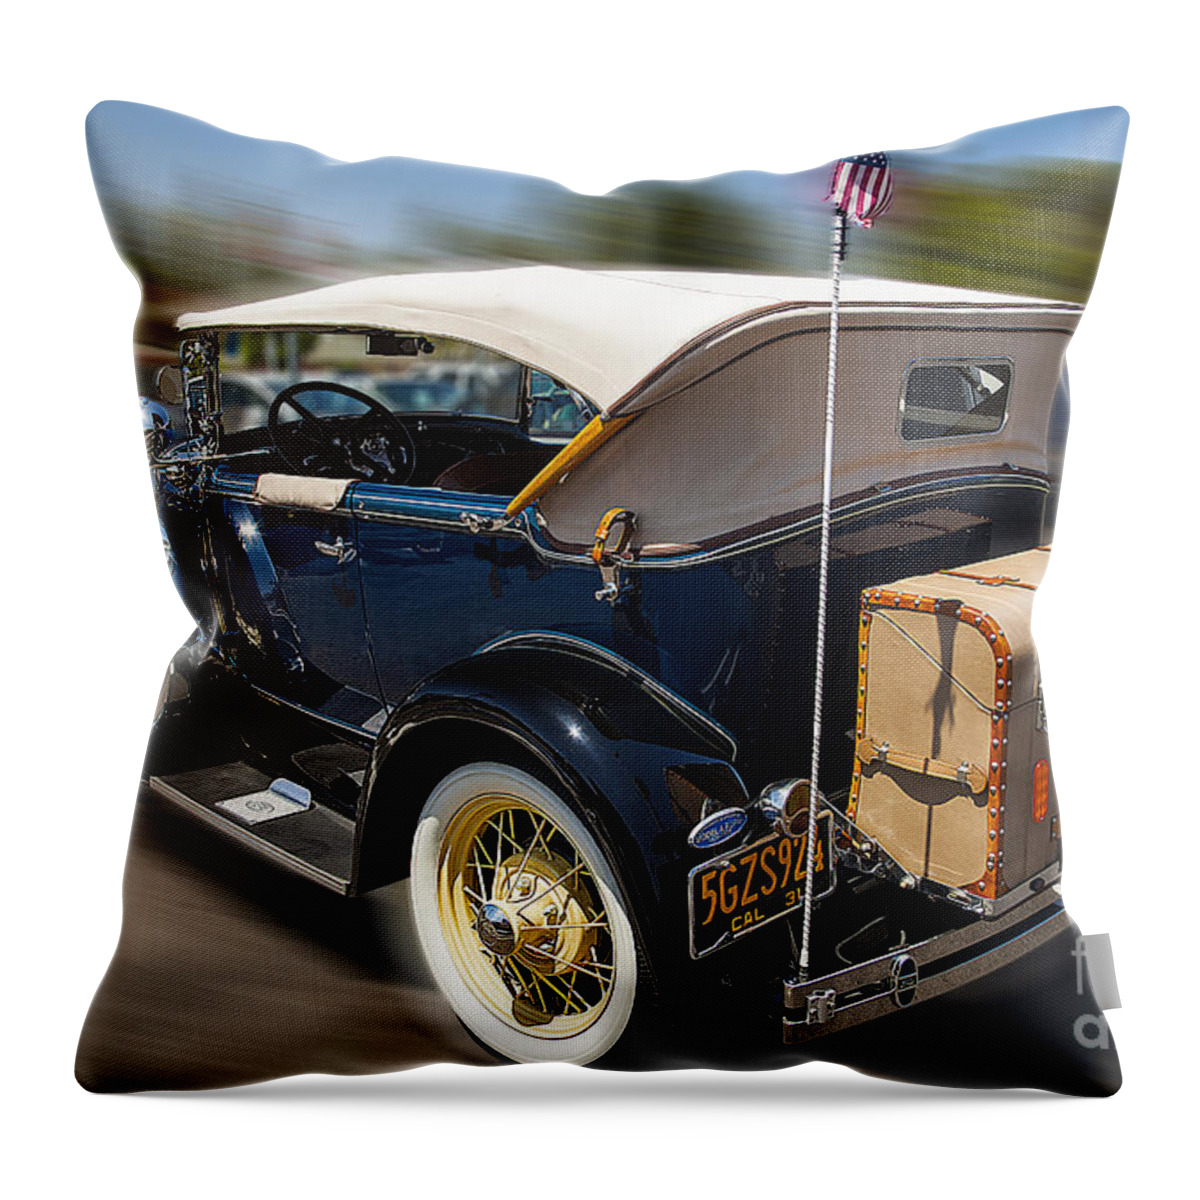 Classic Vintage Shinny 1931 Ford Model A Convertible Fine Art Photography Photographs Print Throw Pillow featuring the photograph Classic Vintage Shiny 1931 Ford Model A Convertible Car by Jerry Cowart